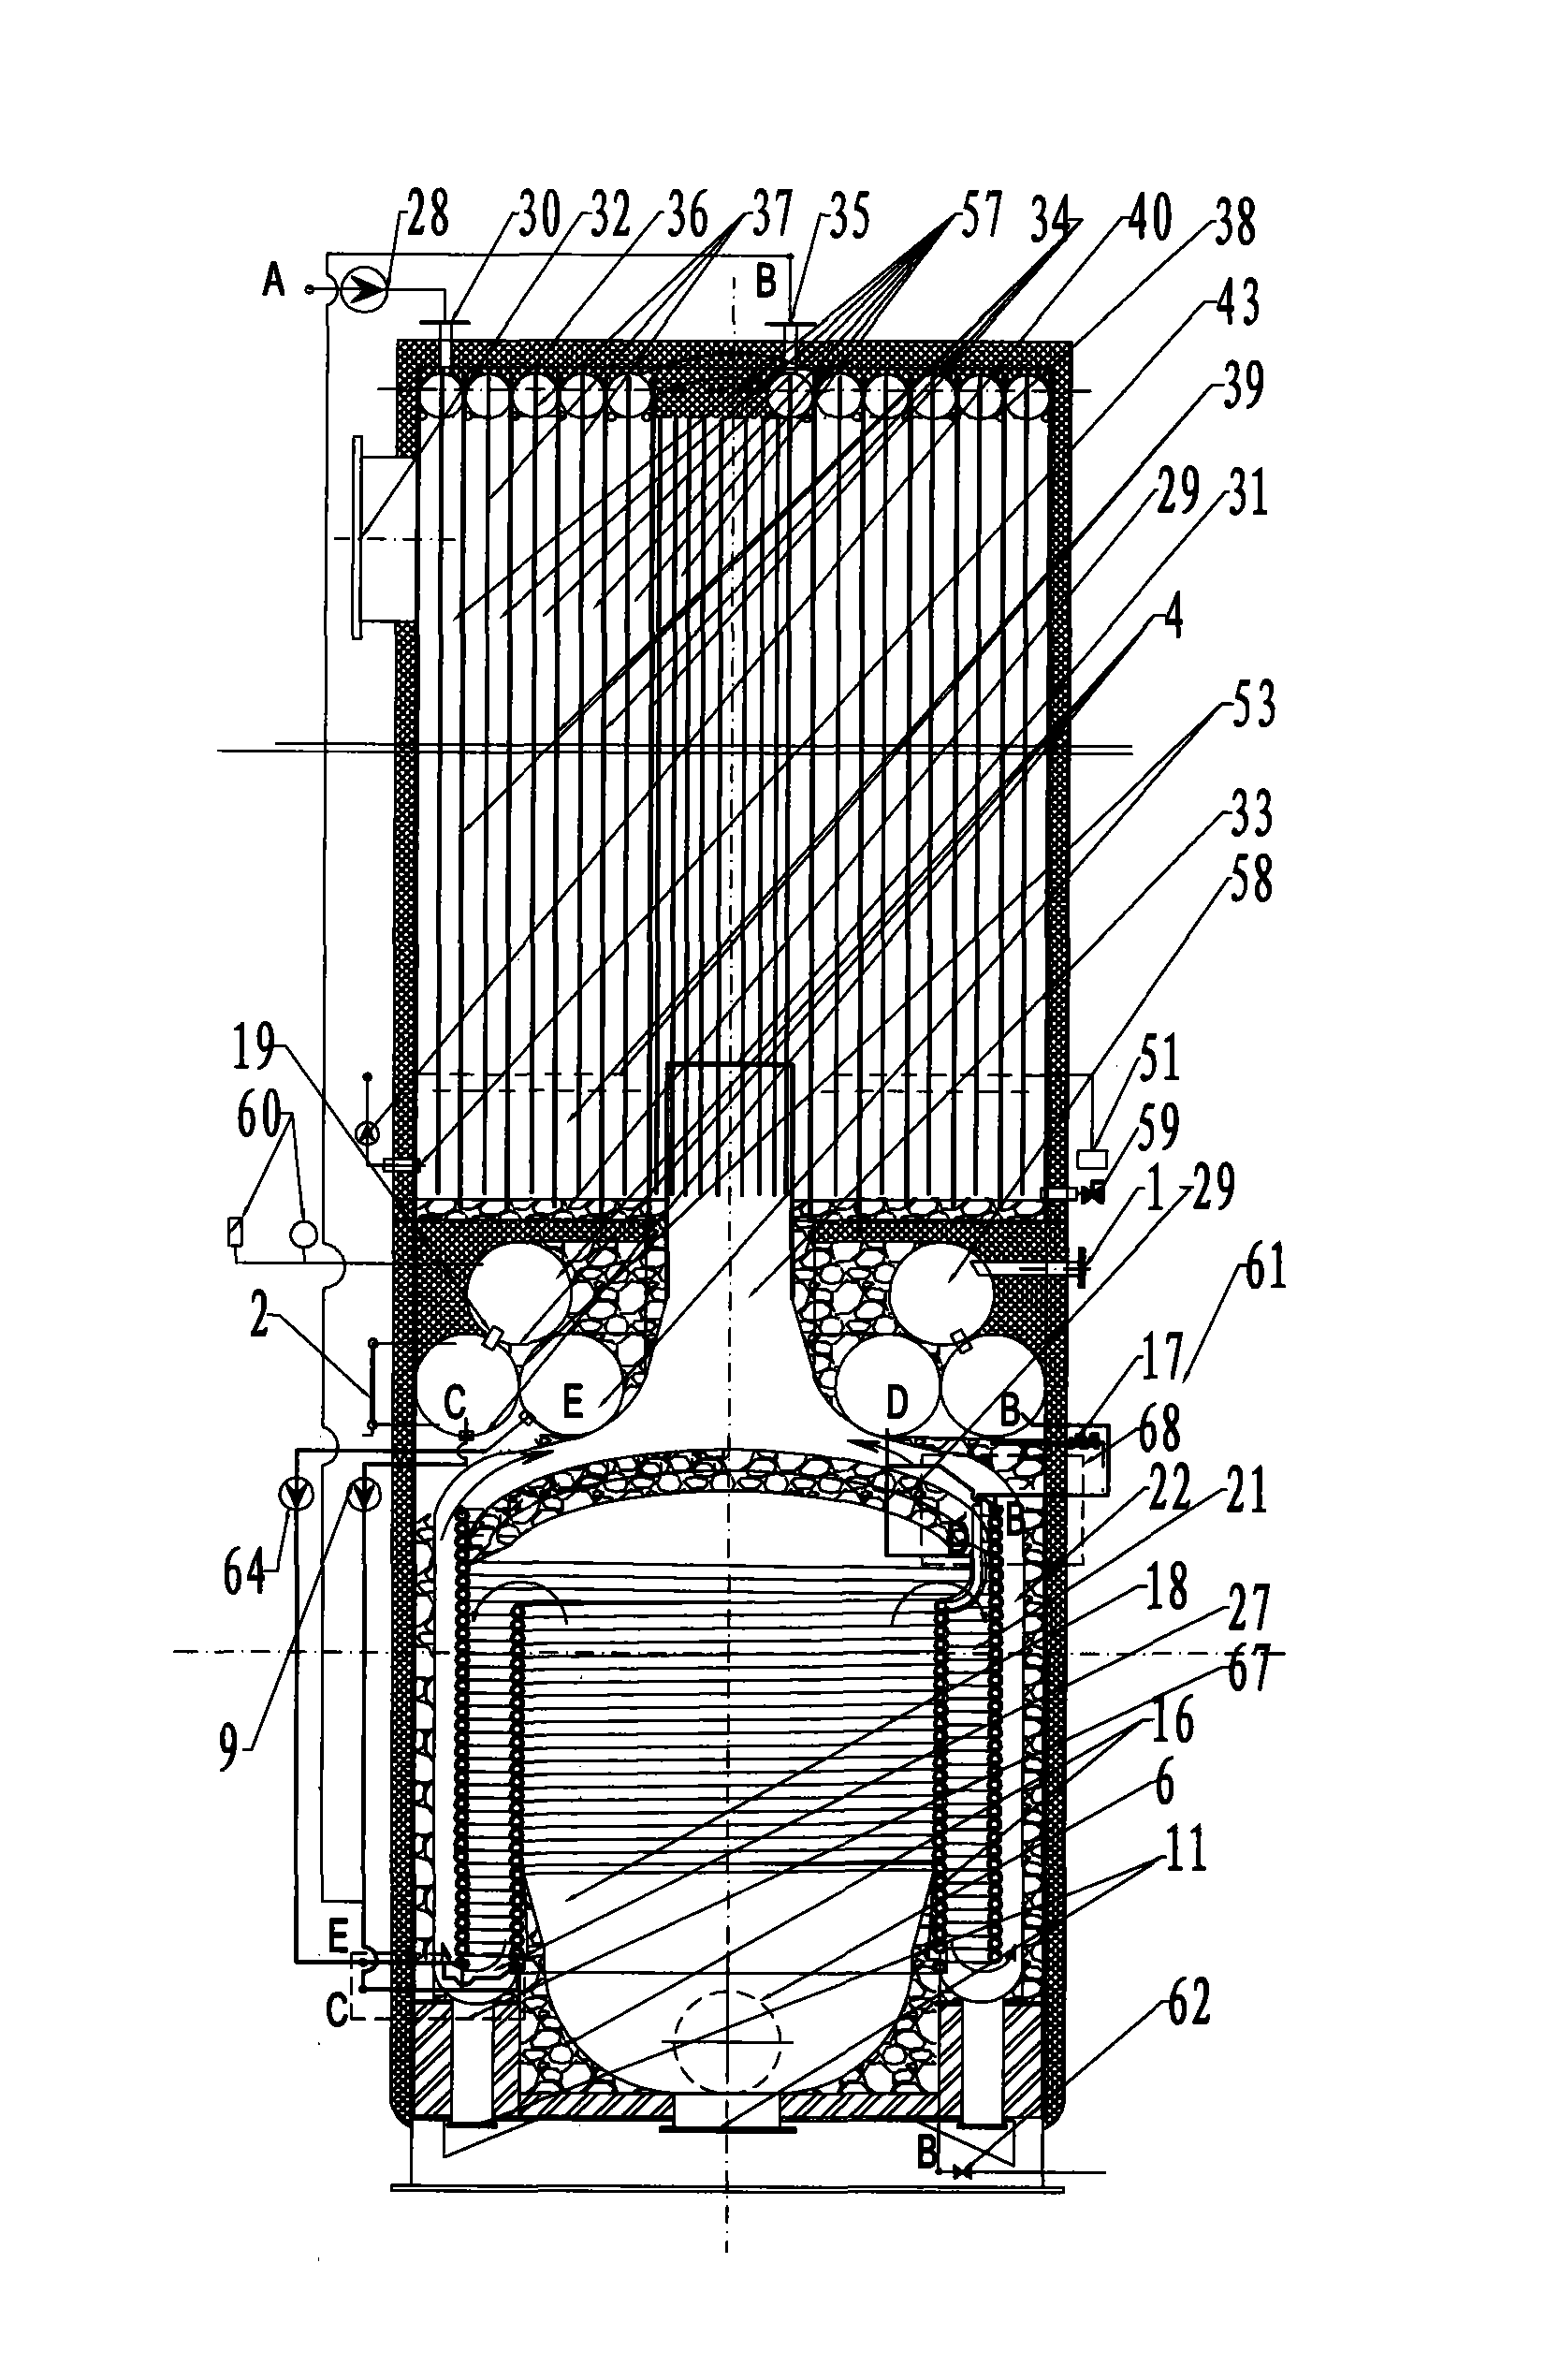 Scale-free direct-current gas boiler for heat pipe heat setting pool provided with double coils and furnace flue